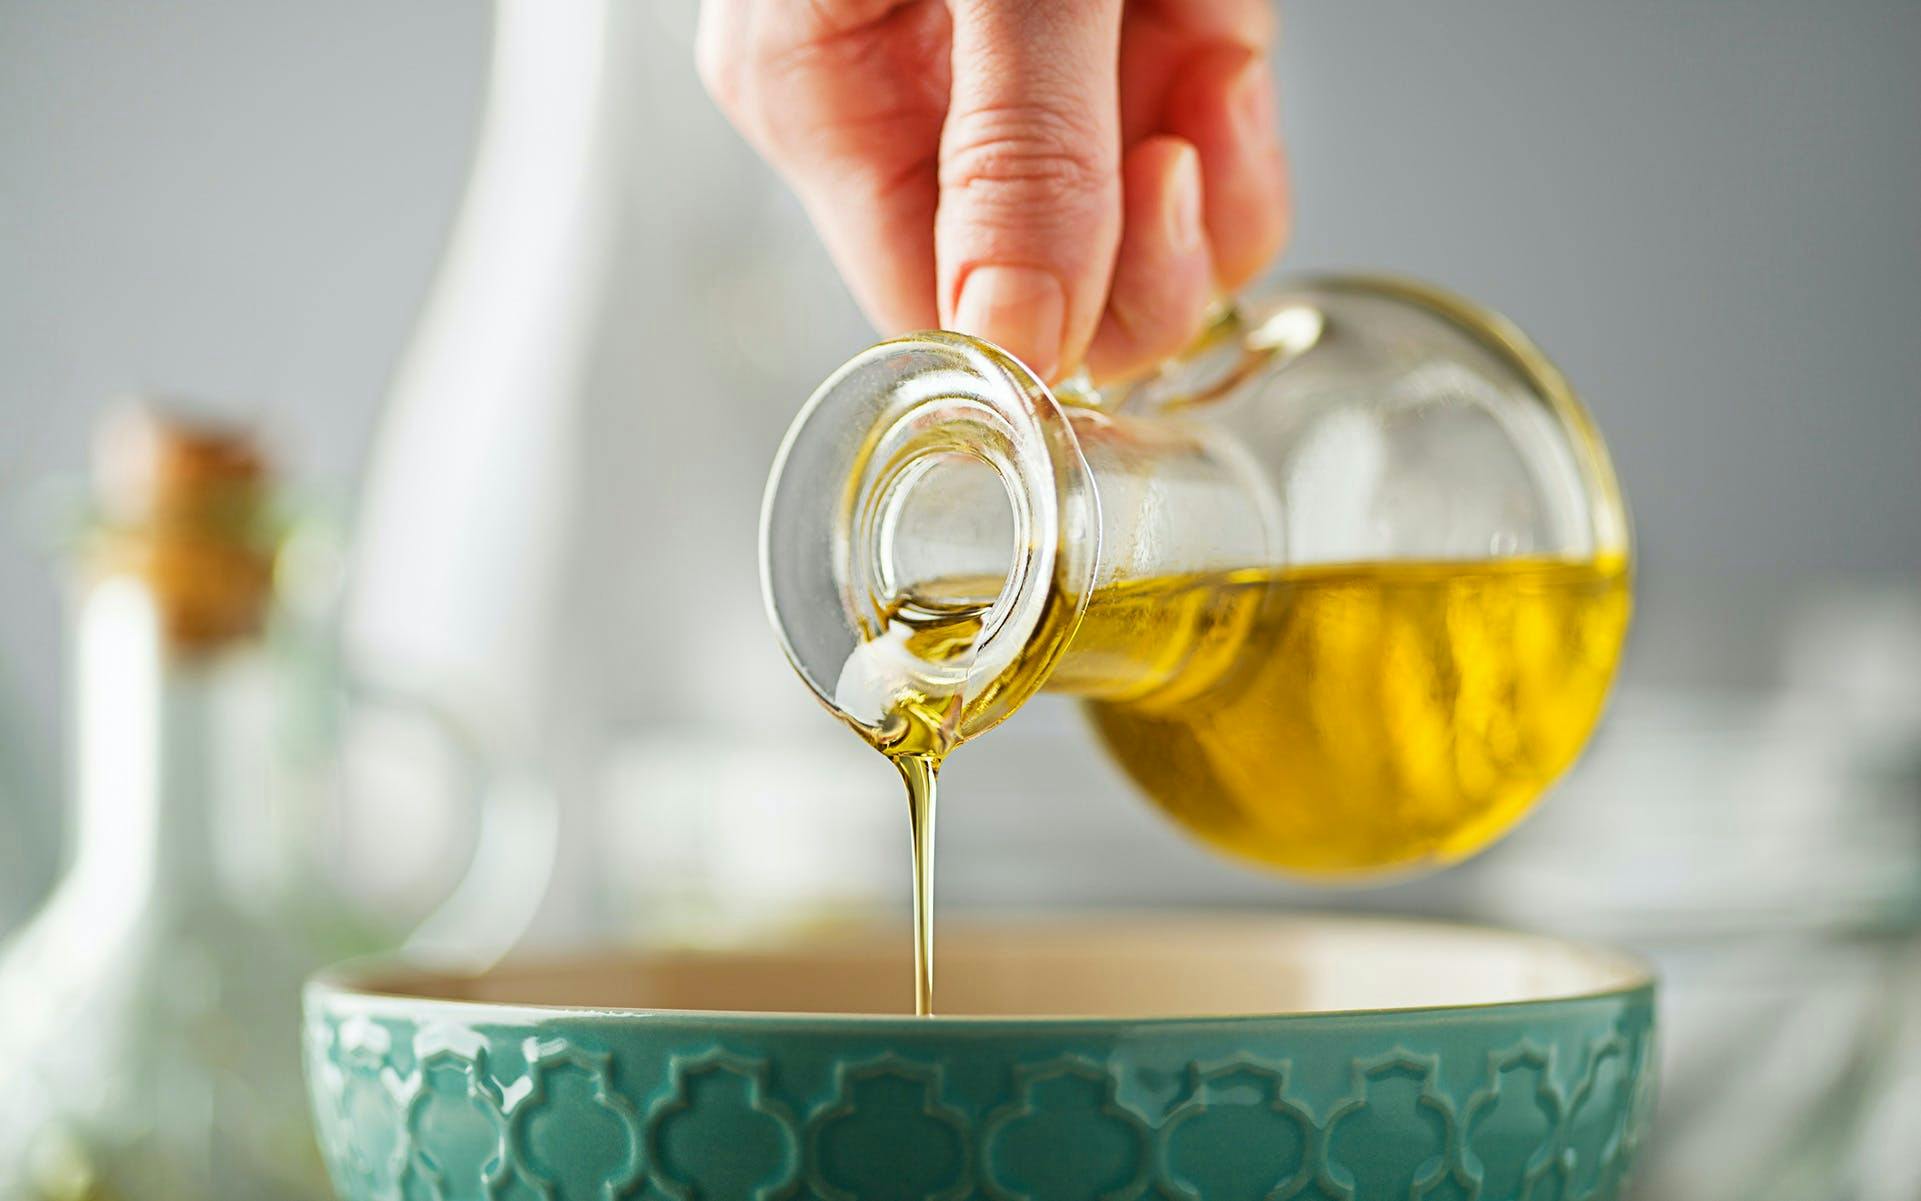 Cooking With CBD Oil: What You Need to Know